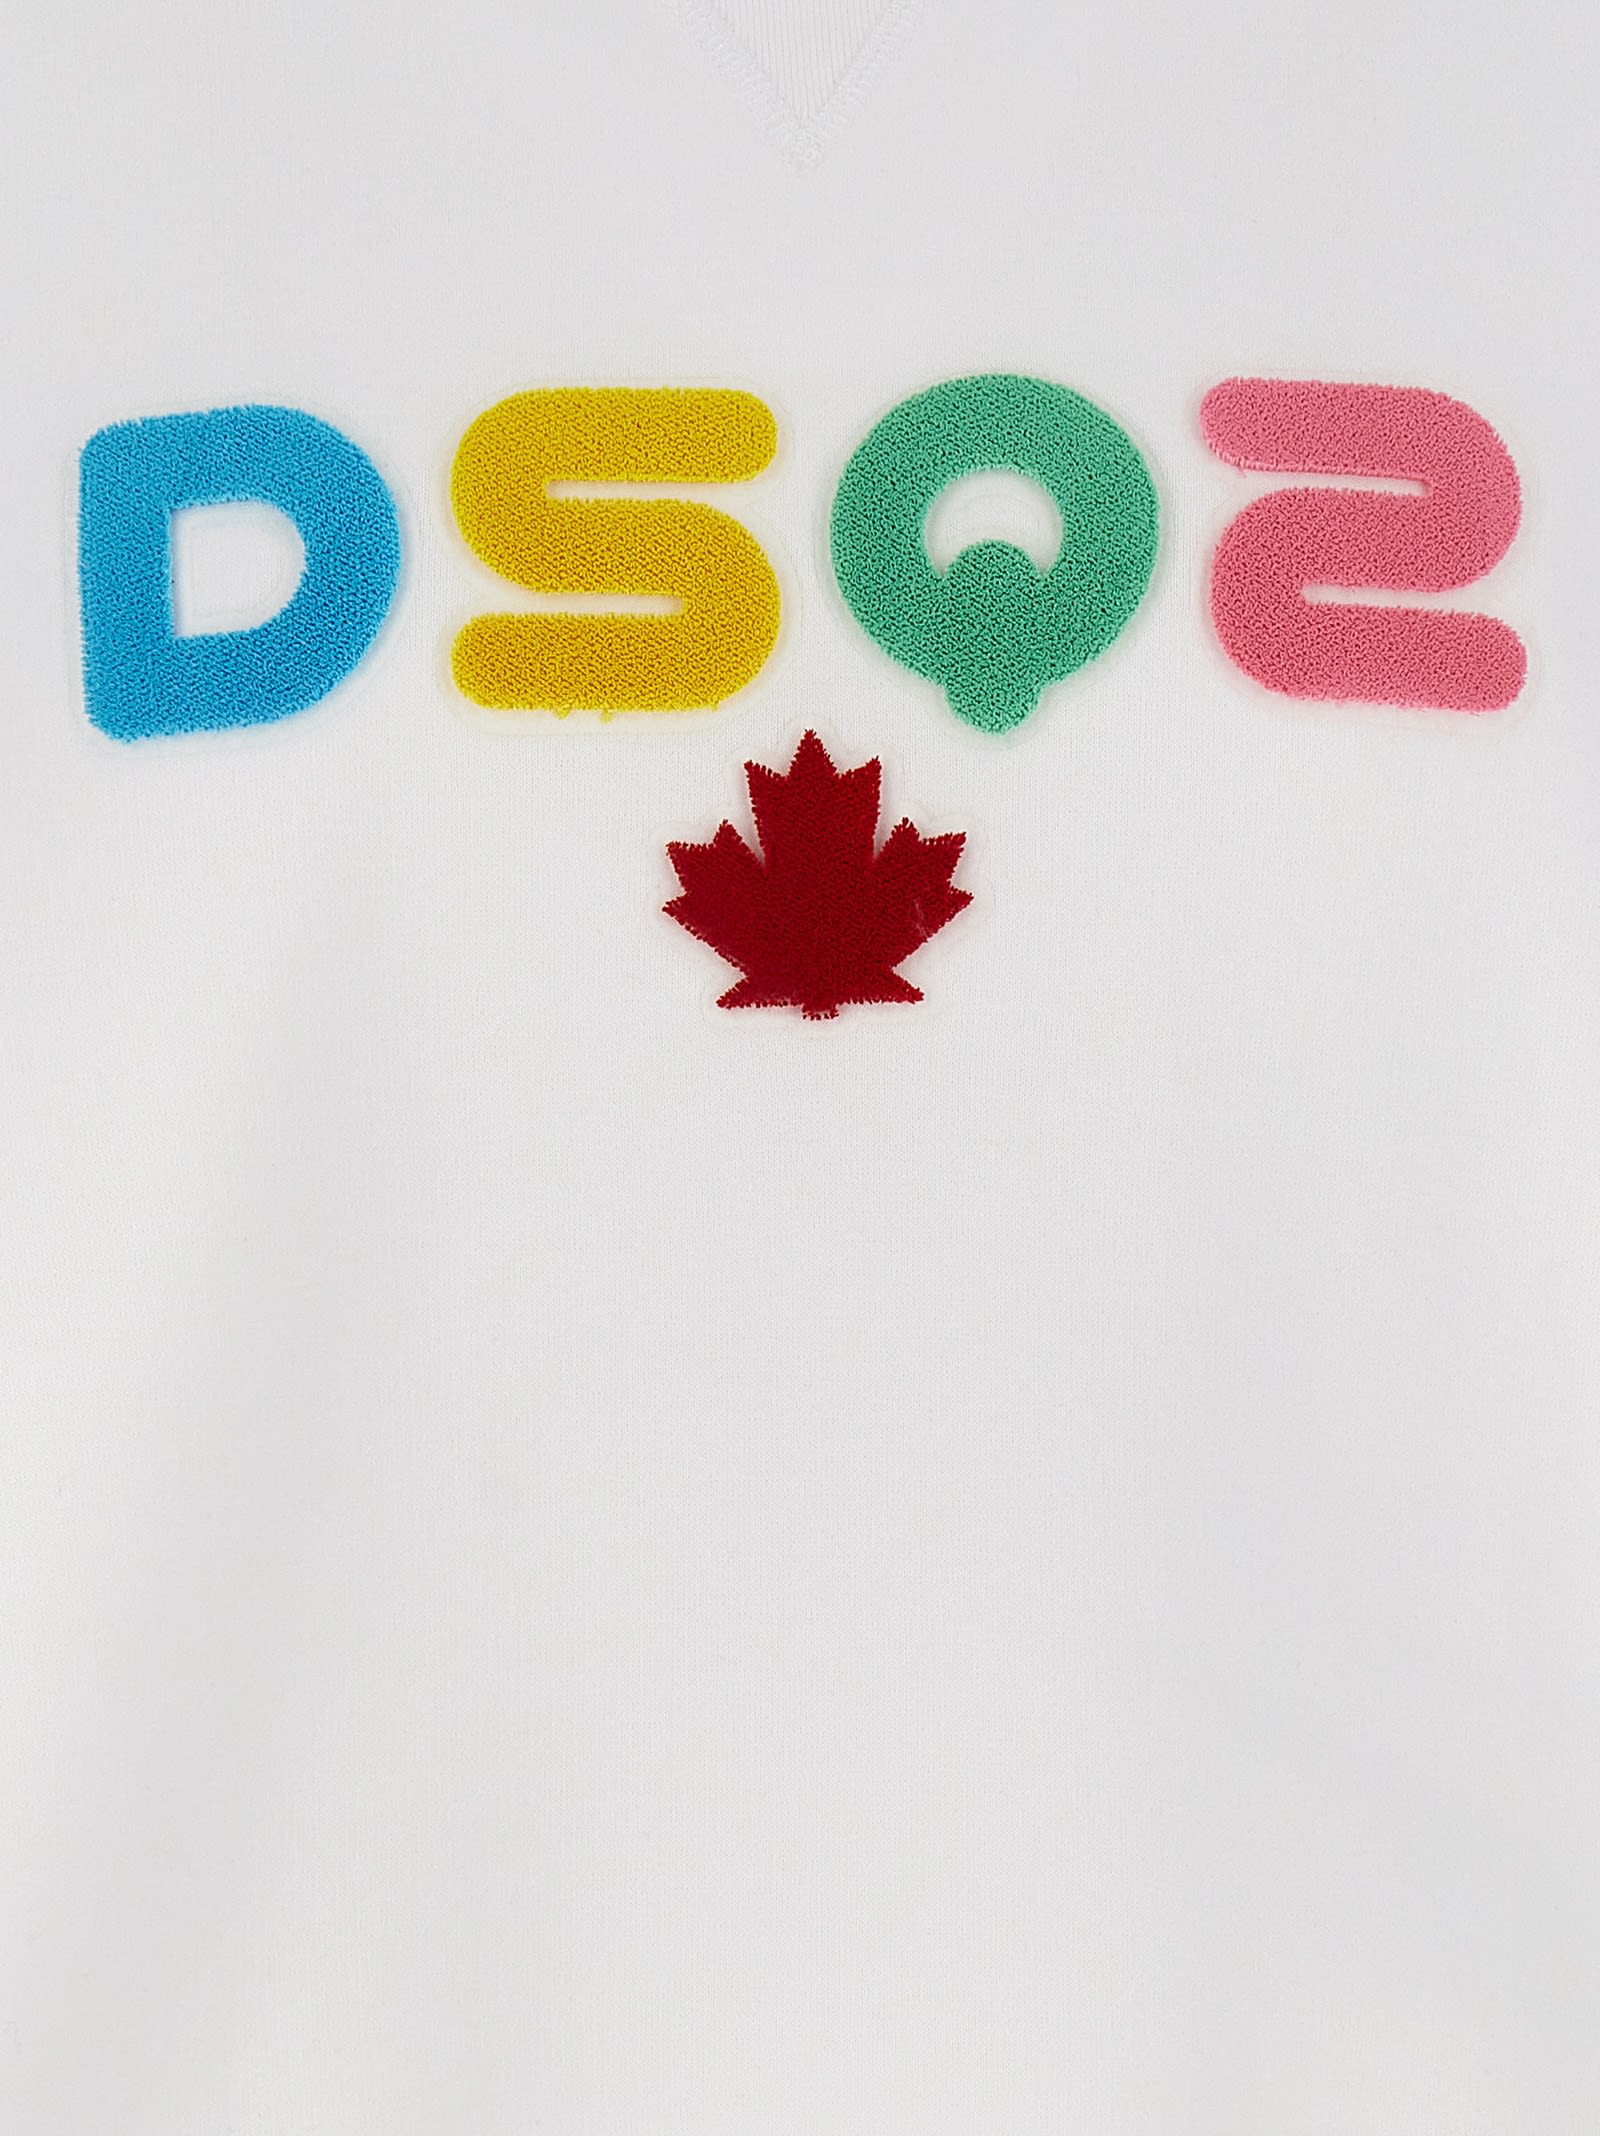 Shop Dsquared2 Cool Fit Sweatshirt In White